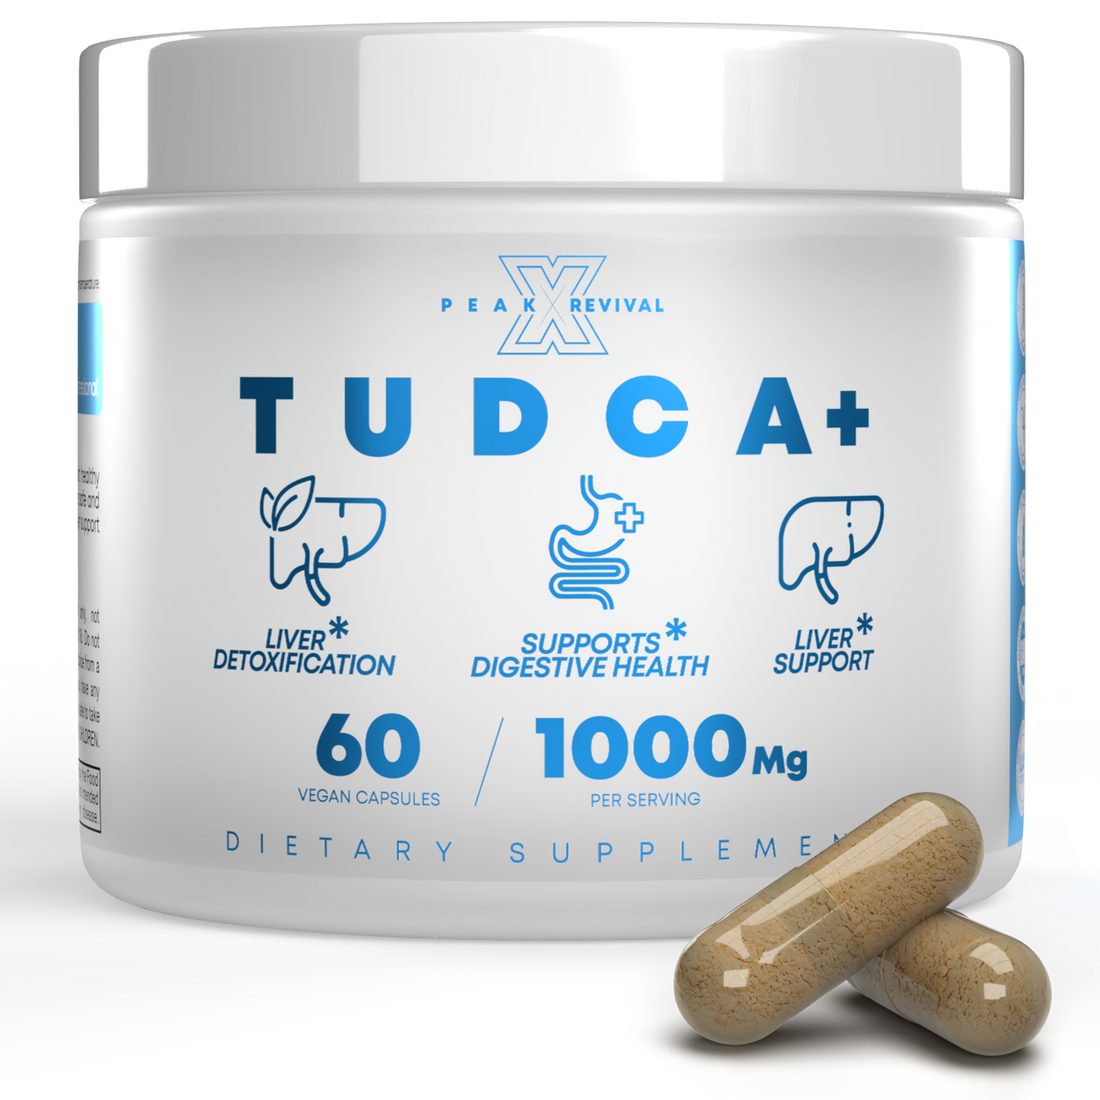 Tudca, also known as tauroursodeoxycholic acid, is a natural bile acid that has been shown to support healthy liver function. It is a safe and effective alternative to synthetic liver support supplements.